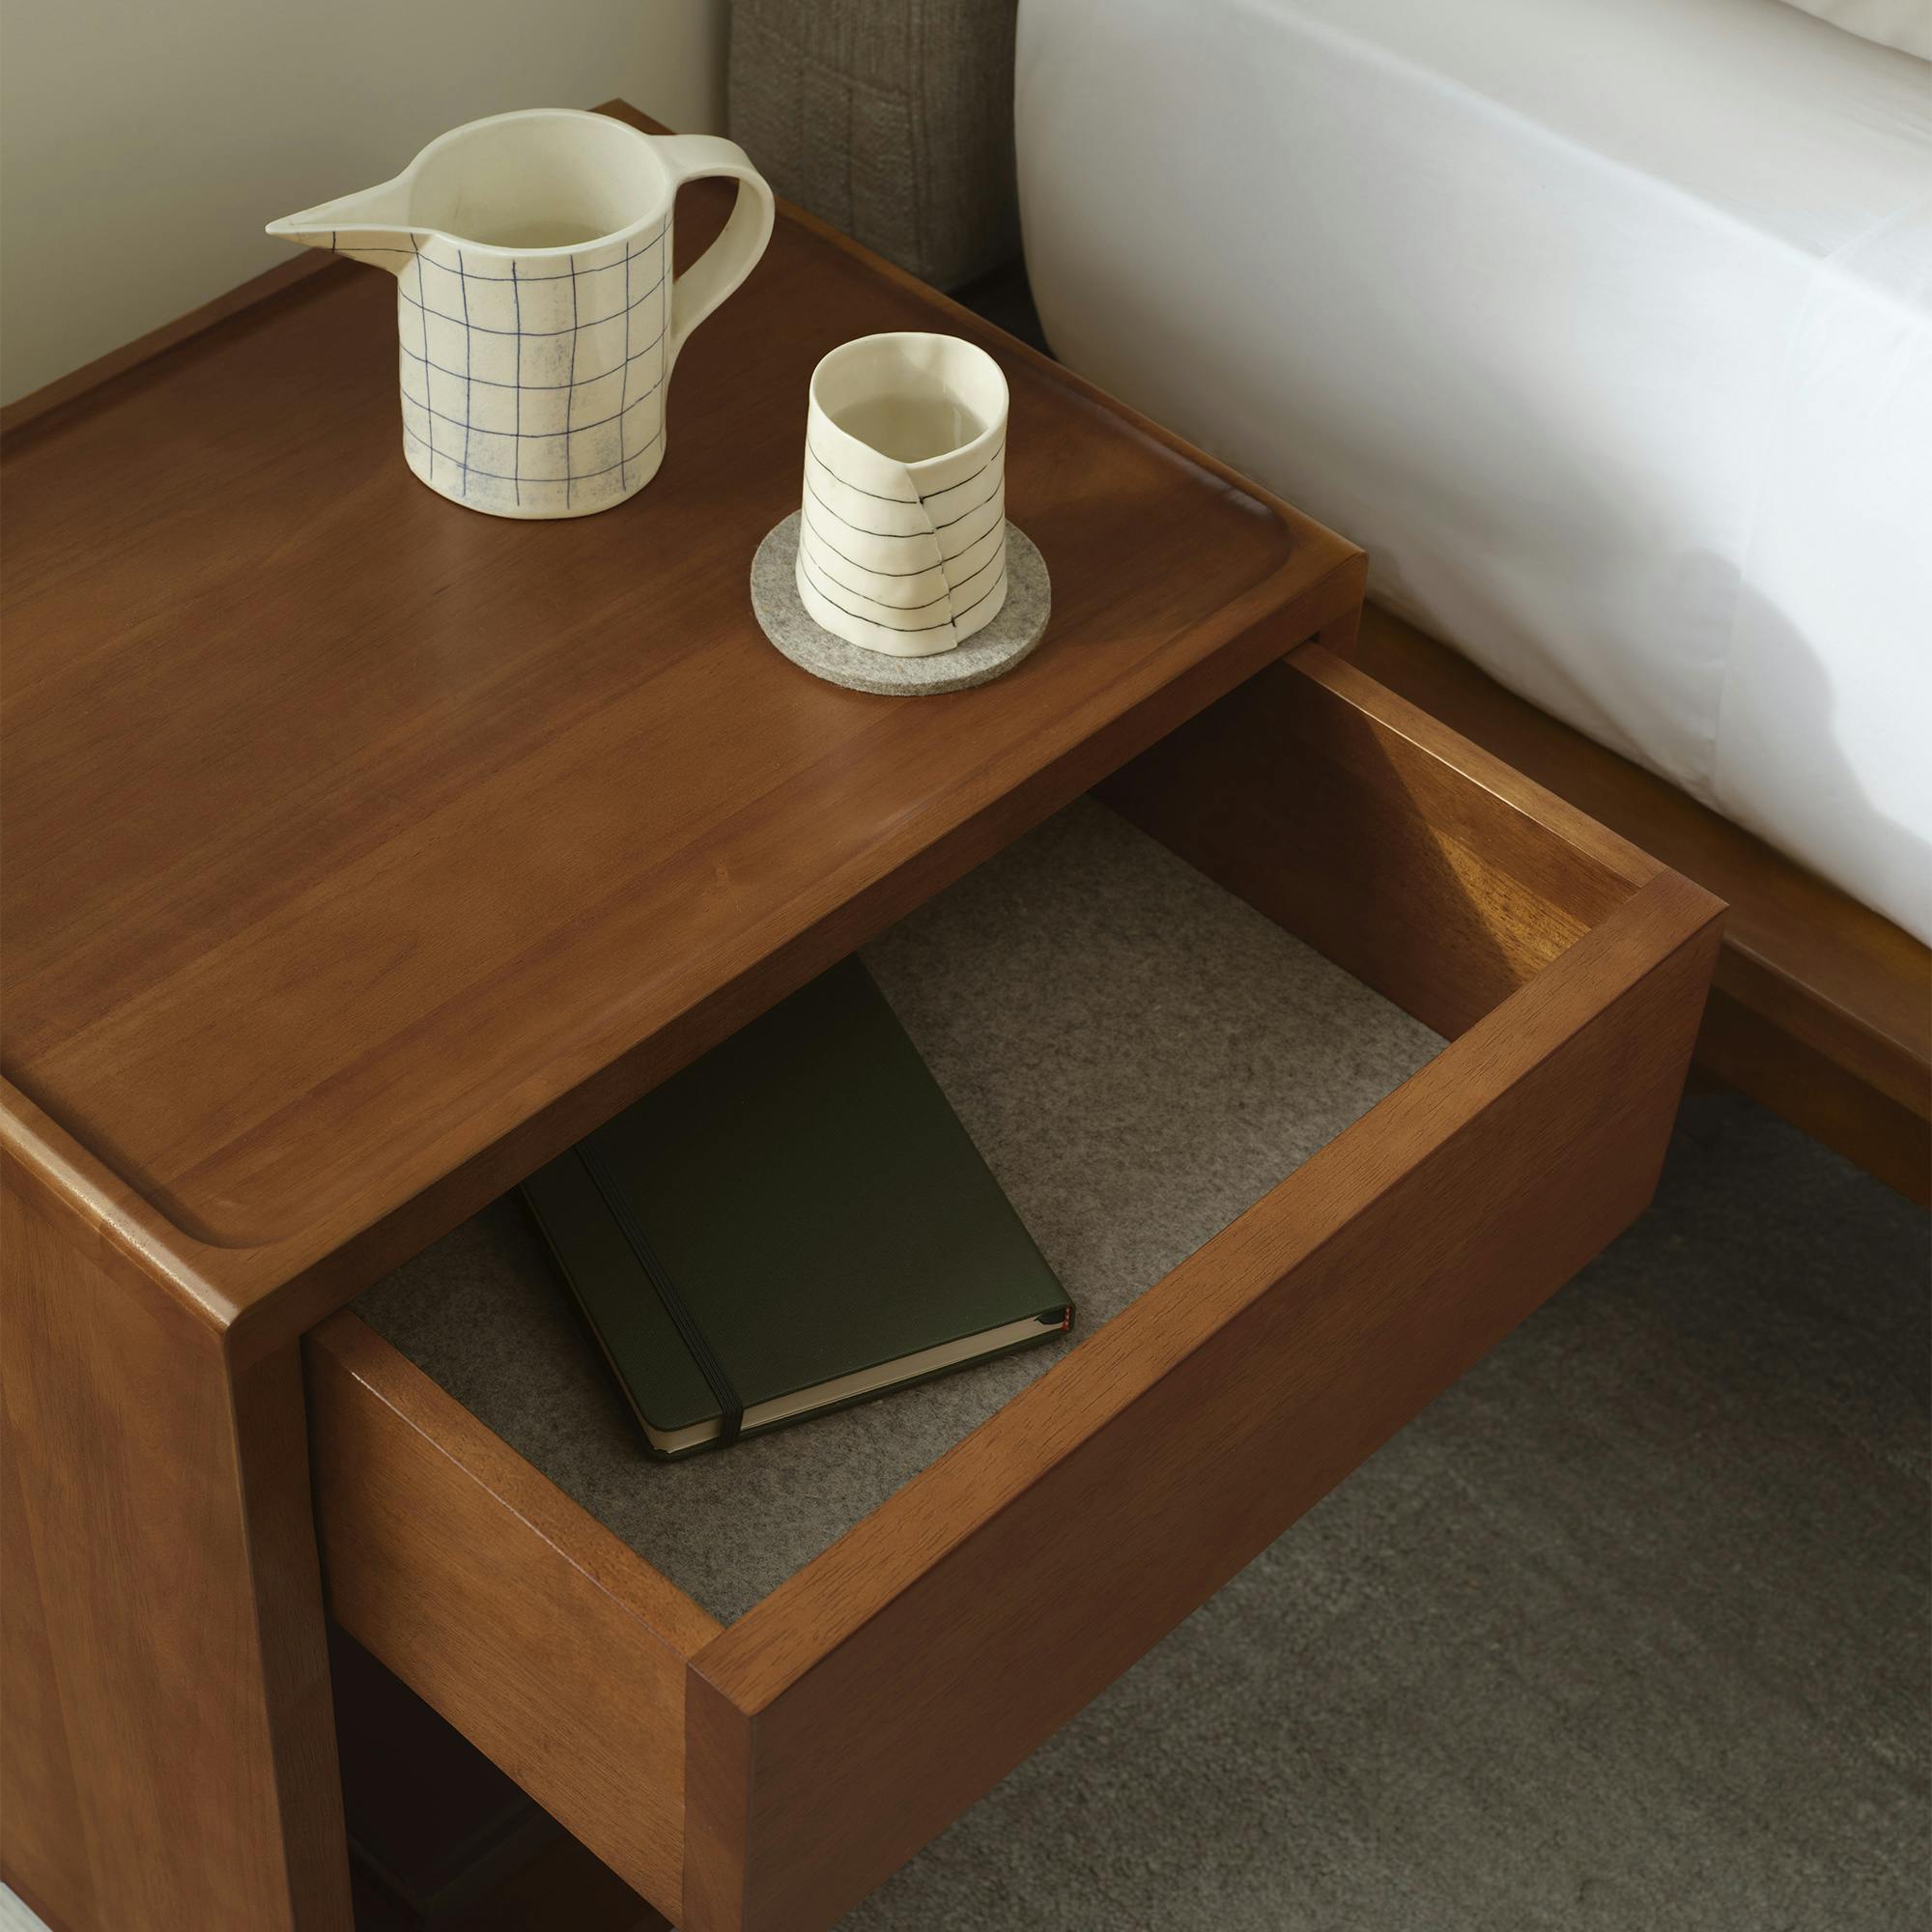 Felt Liners (Nightstand / Lifestyle PDP)